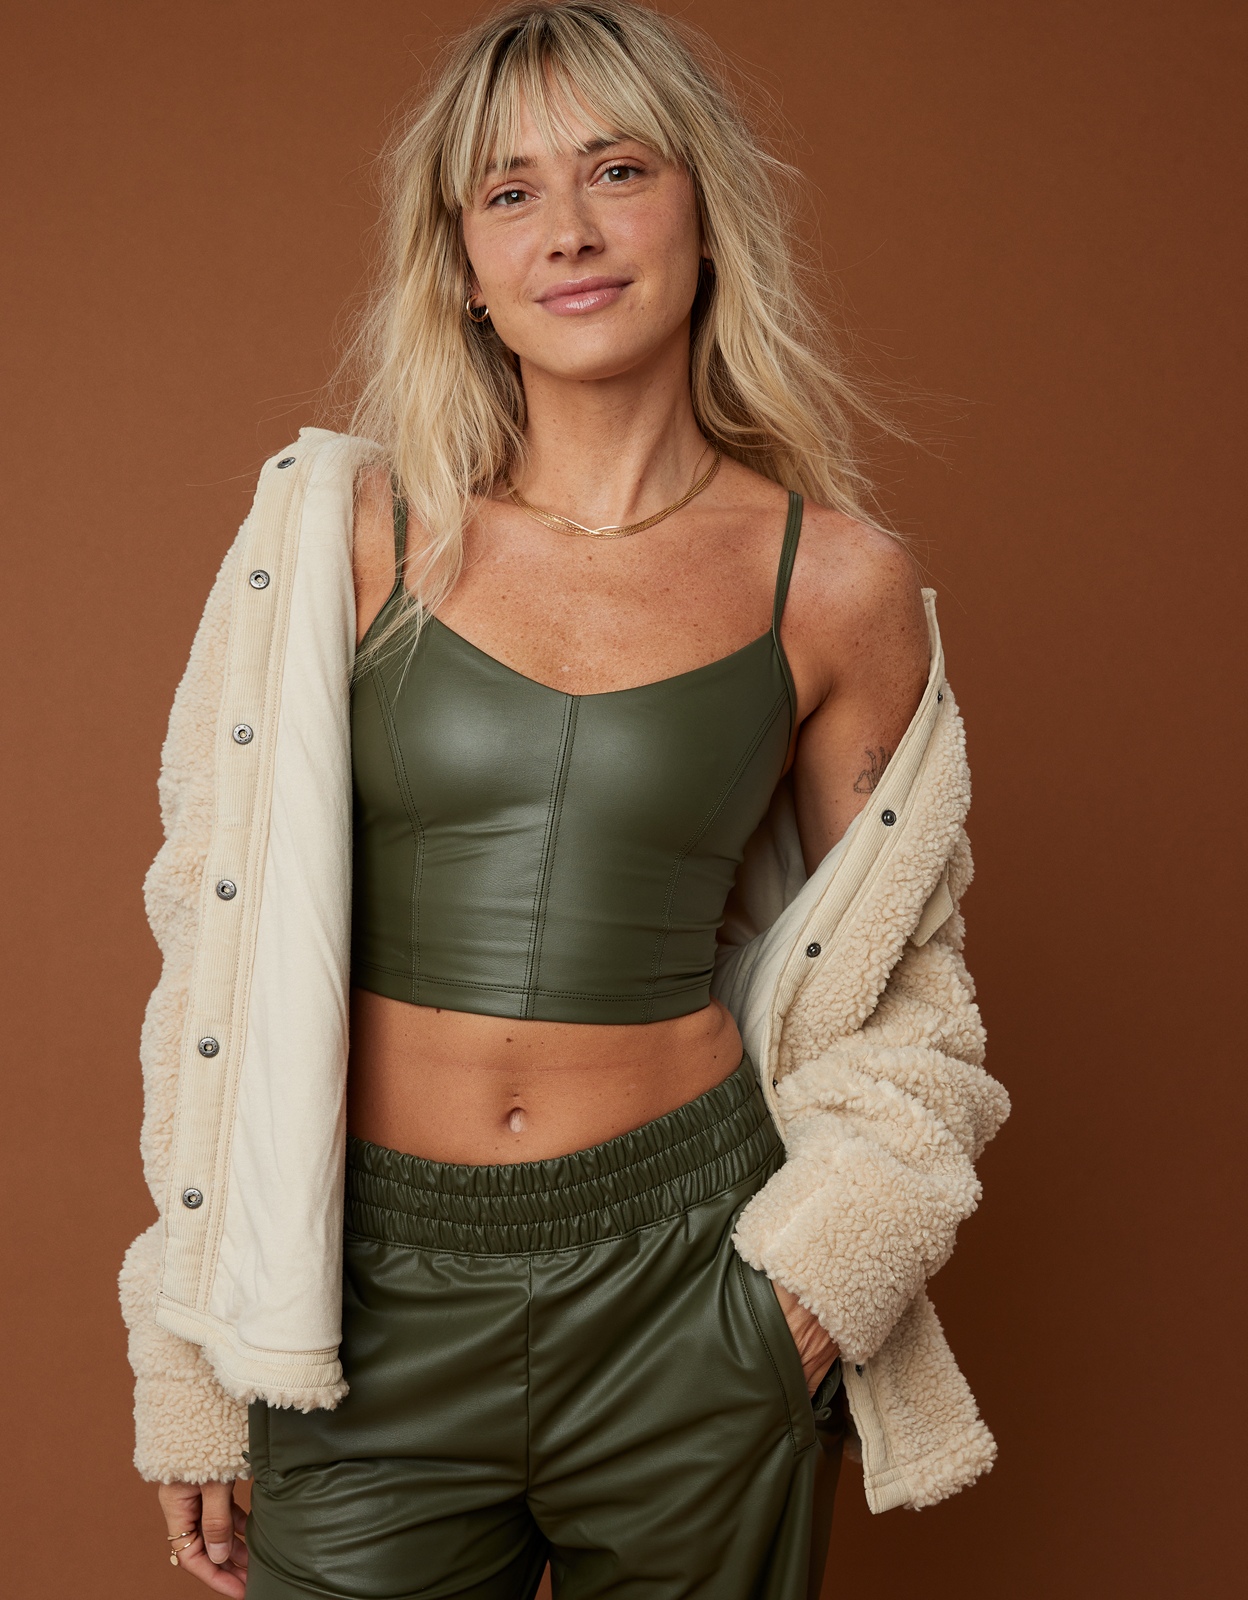 Buy OFFLINE By Aerie Real Luxe Faux Leather Bra Top online